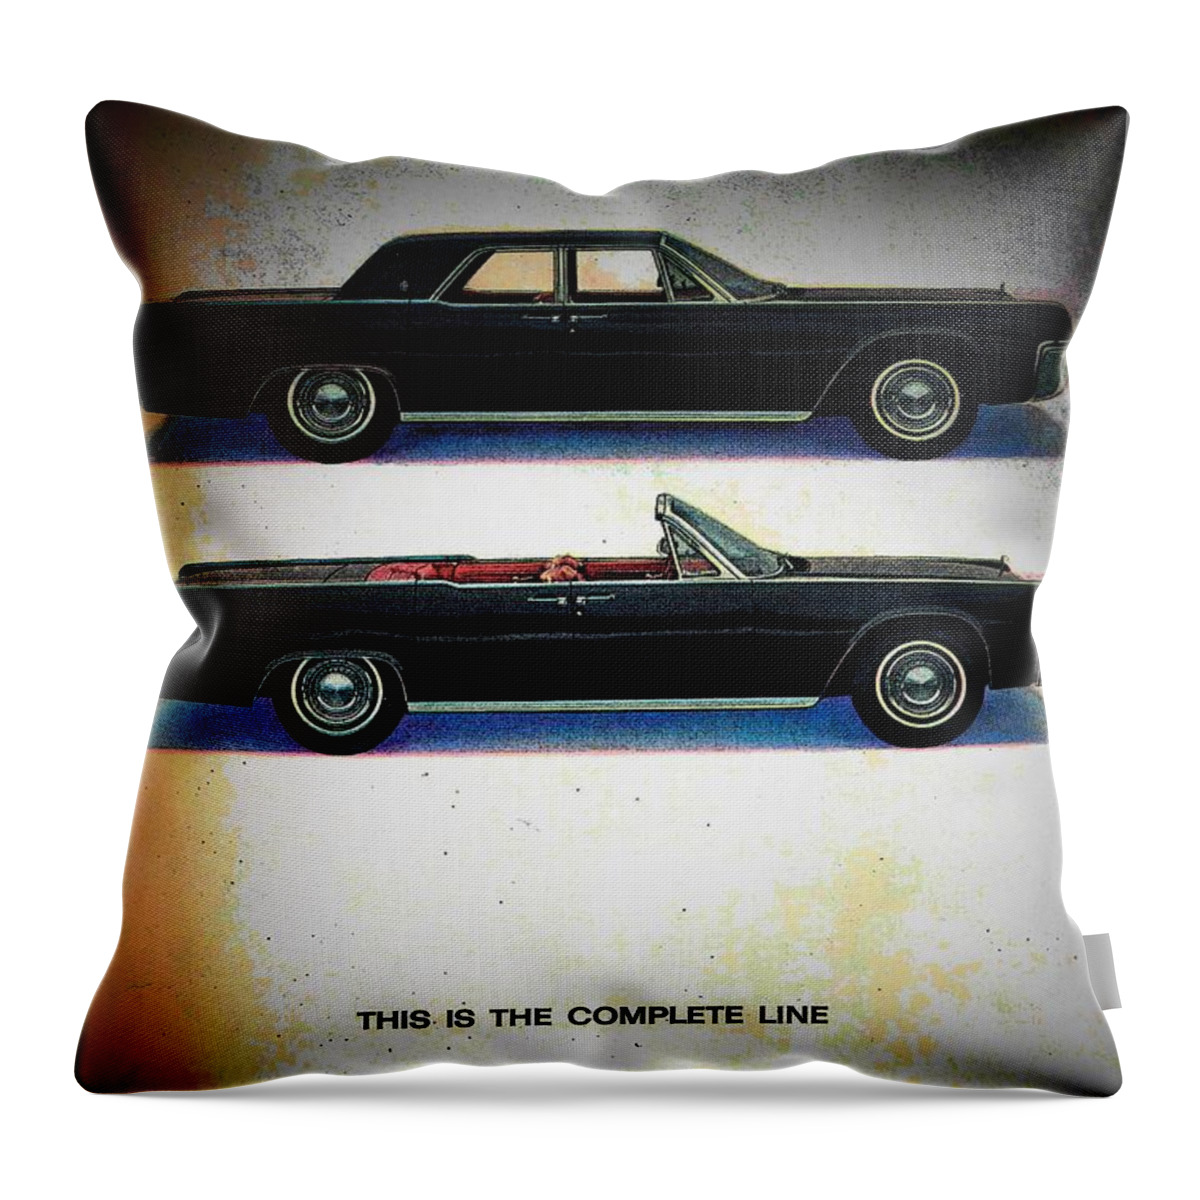 Advertisements Throw Pillow featuring the photograph The Complete Line by John Schneider